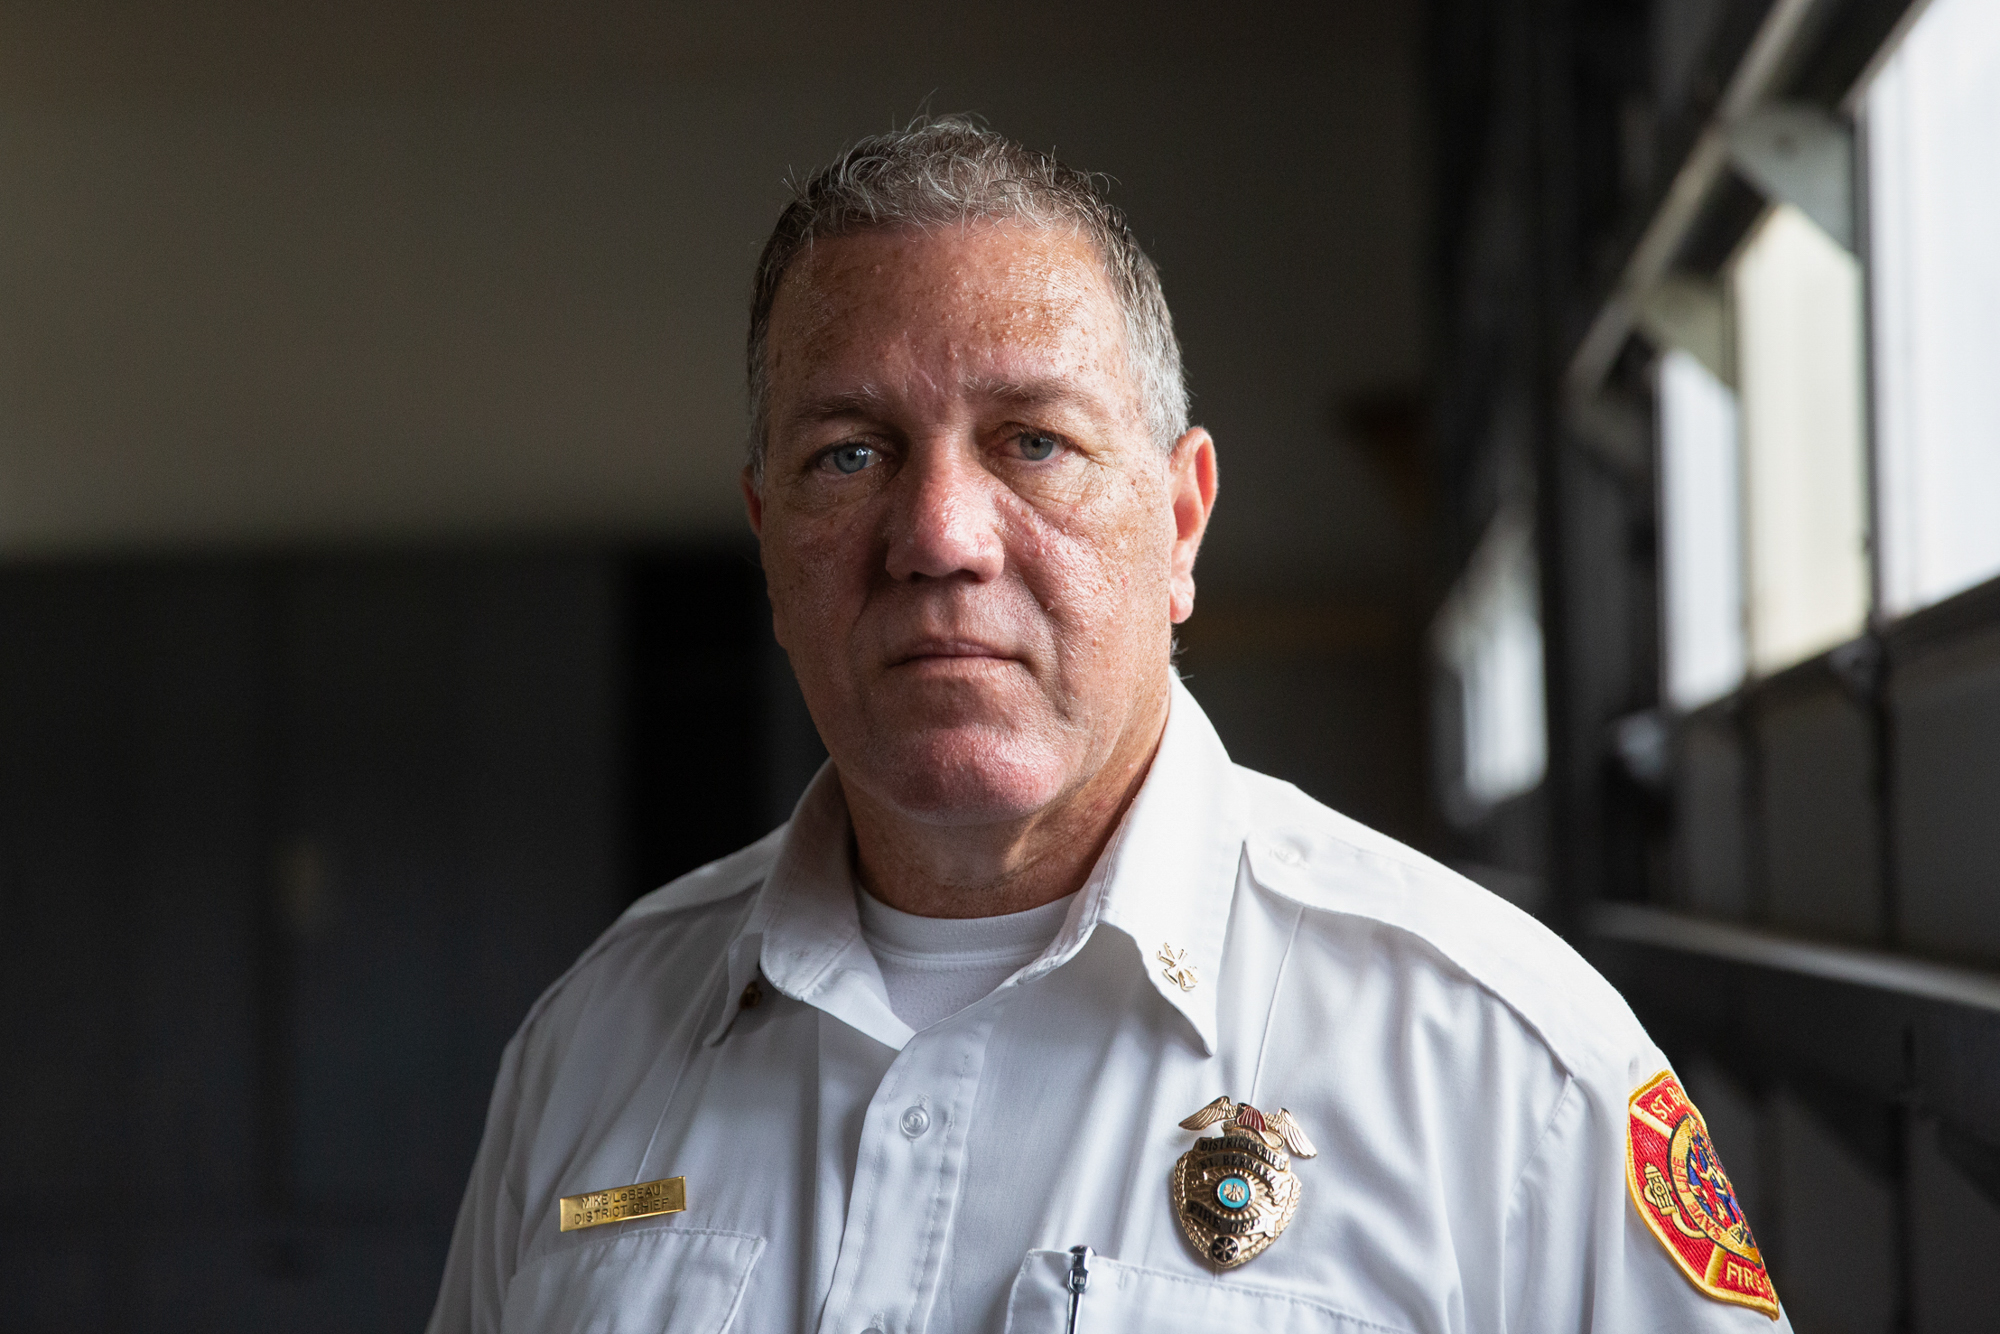 Michael LeBeau - District Chief Michael LeBeau of the St. Bernard Parish Fire Department worked 17 days straight during Hurricane Katrina, operating a shelter and helping with evacuations. He says it's important for first responders and those impacted by disasters to get the emotional support that he never received during those grueling weeks. (Ellen O'Brien/News21)